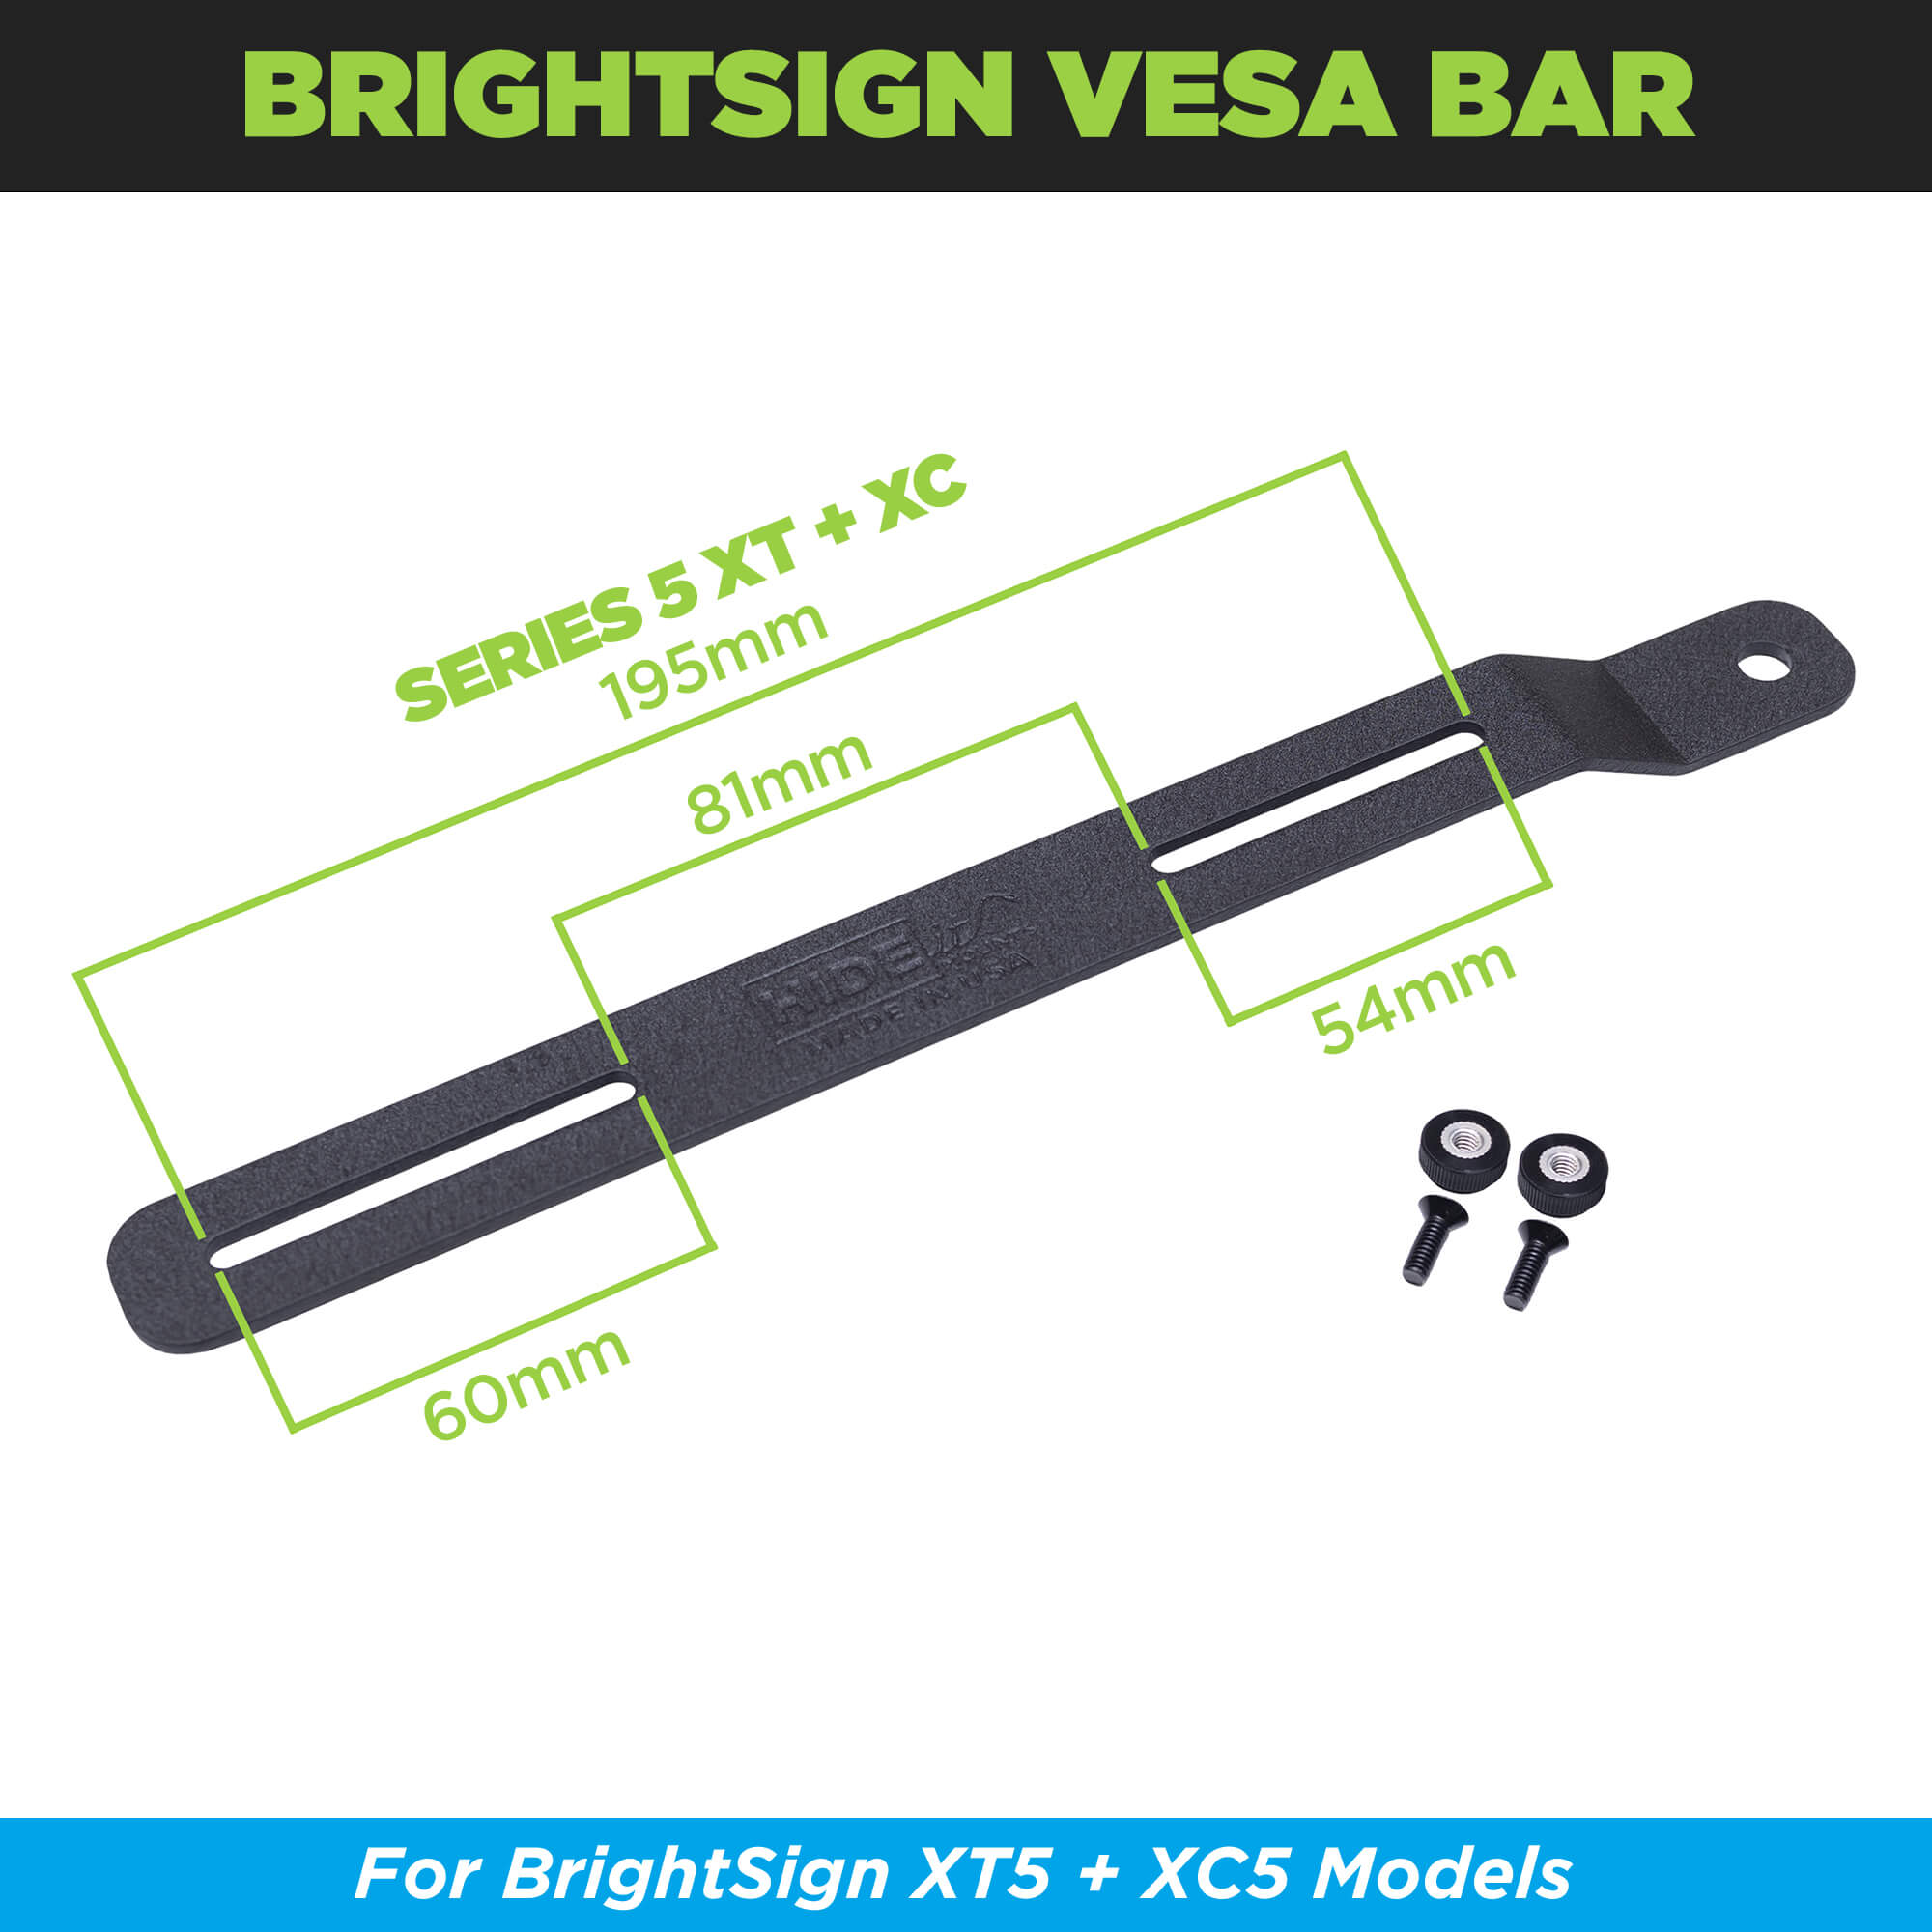 The HIDEit Series 5 BrightSign Player Adapter Bar with obround holes works for the larger Series 5 models including: XT5 and XC5.